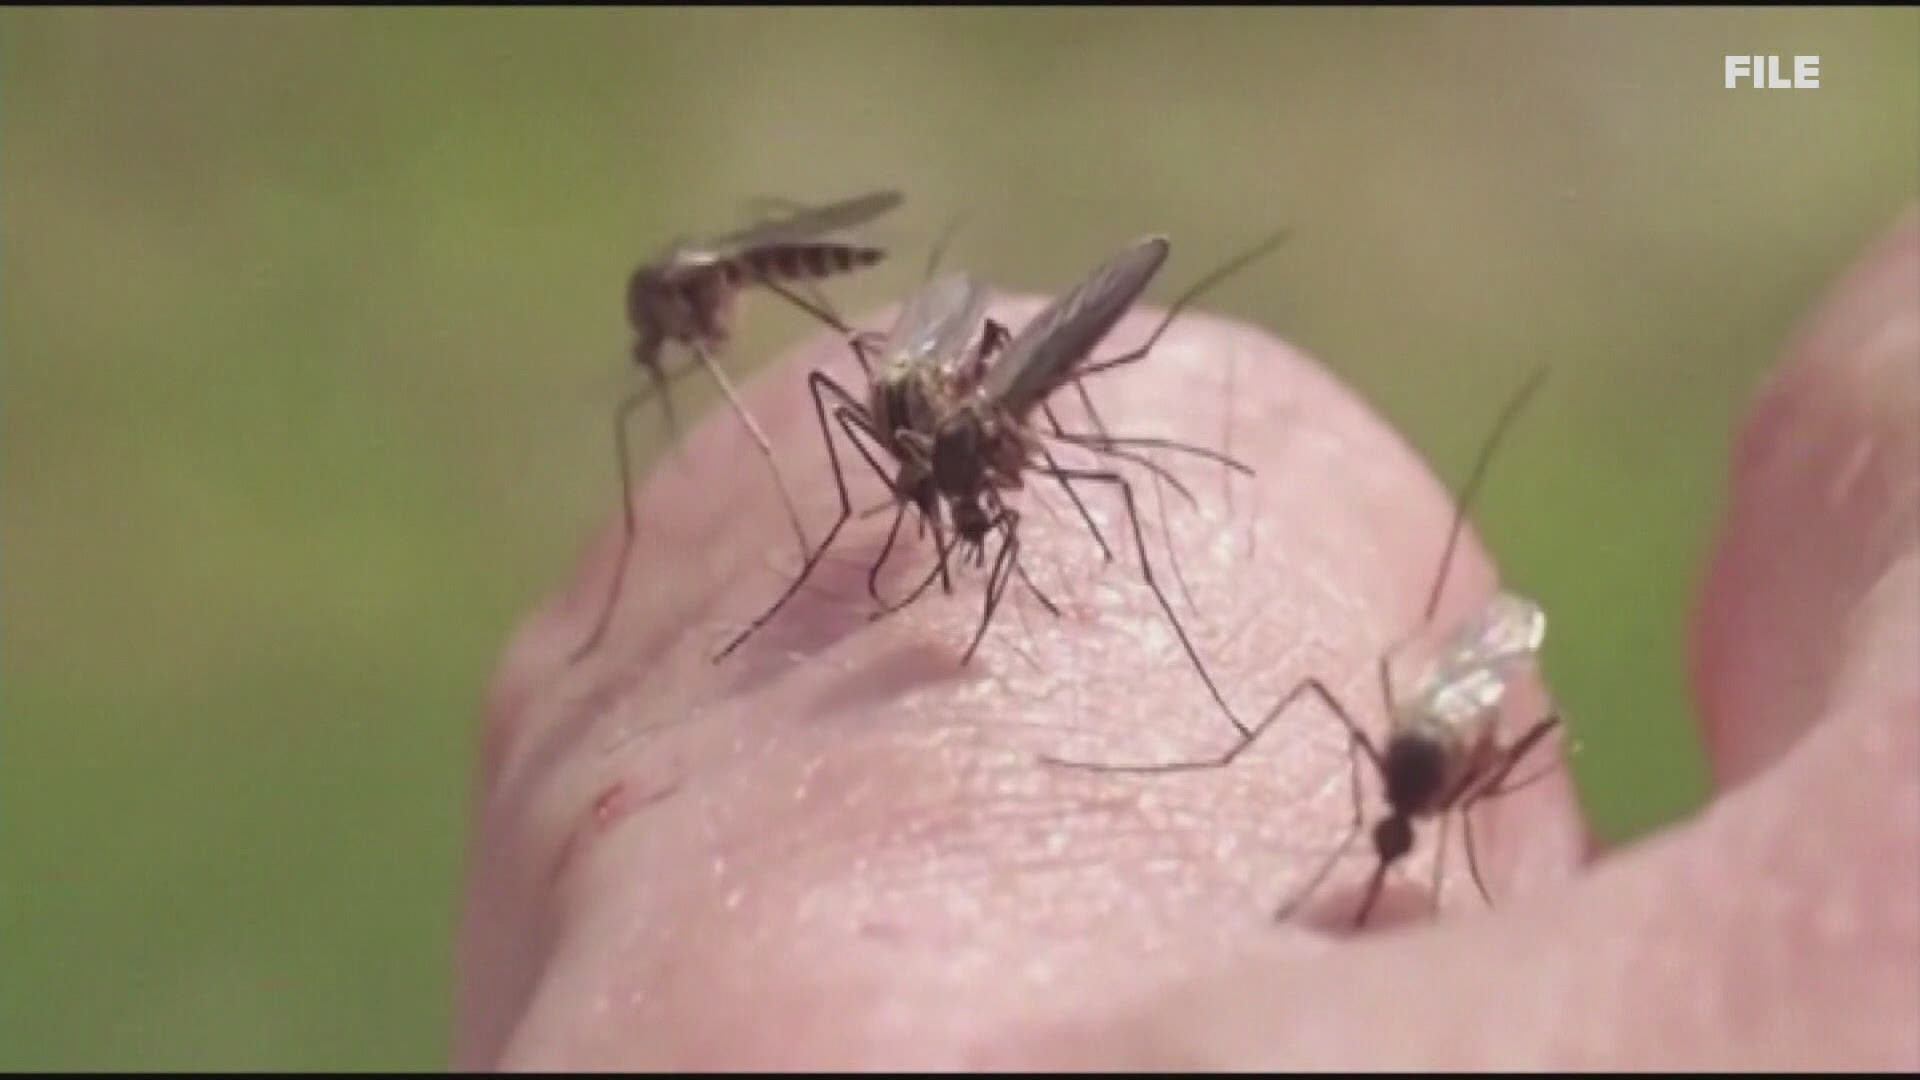 Health officials say someone from Cumberland County has most likely contracted the West Nile virus.